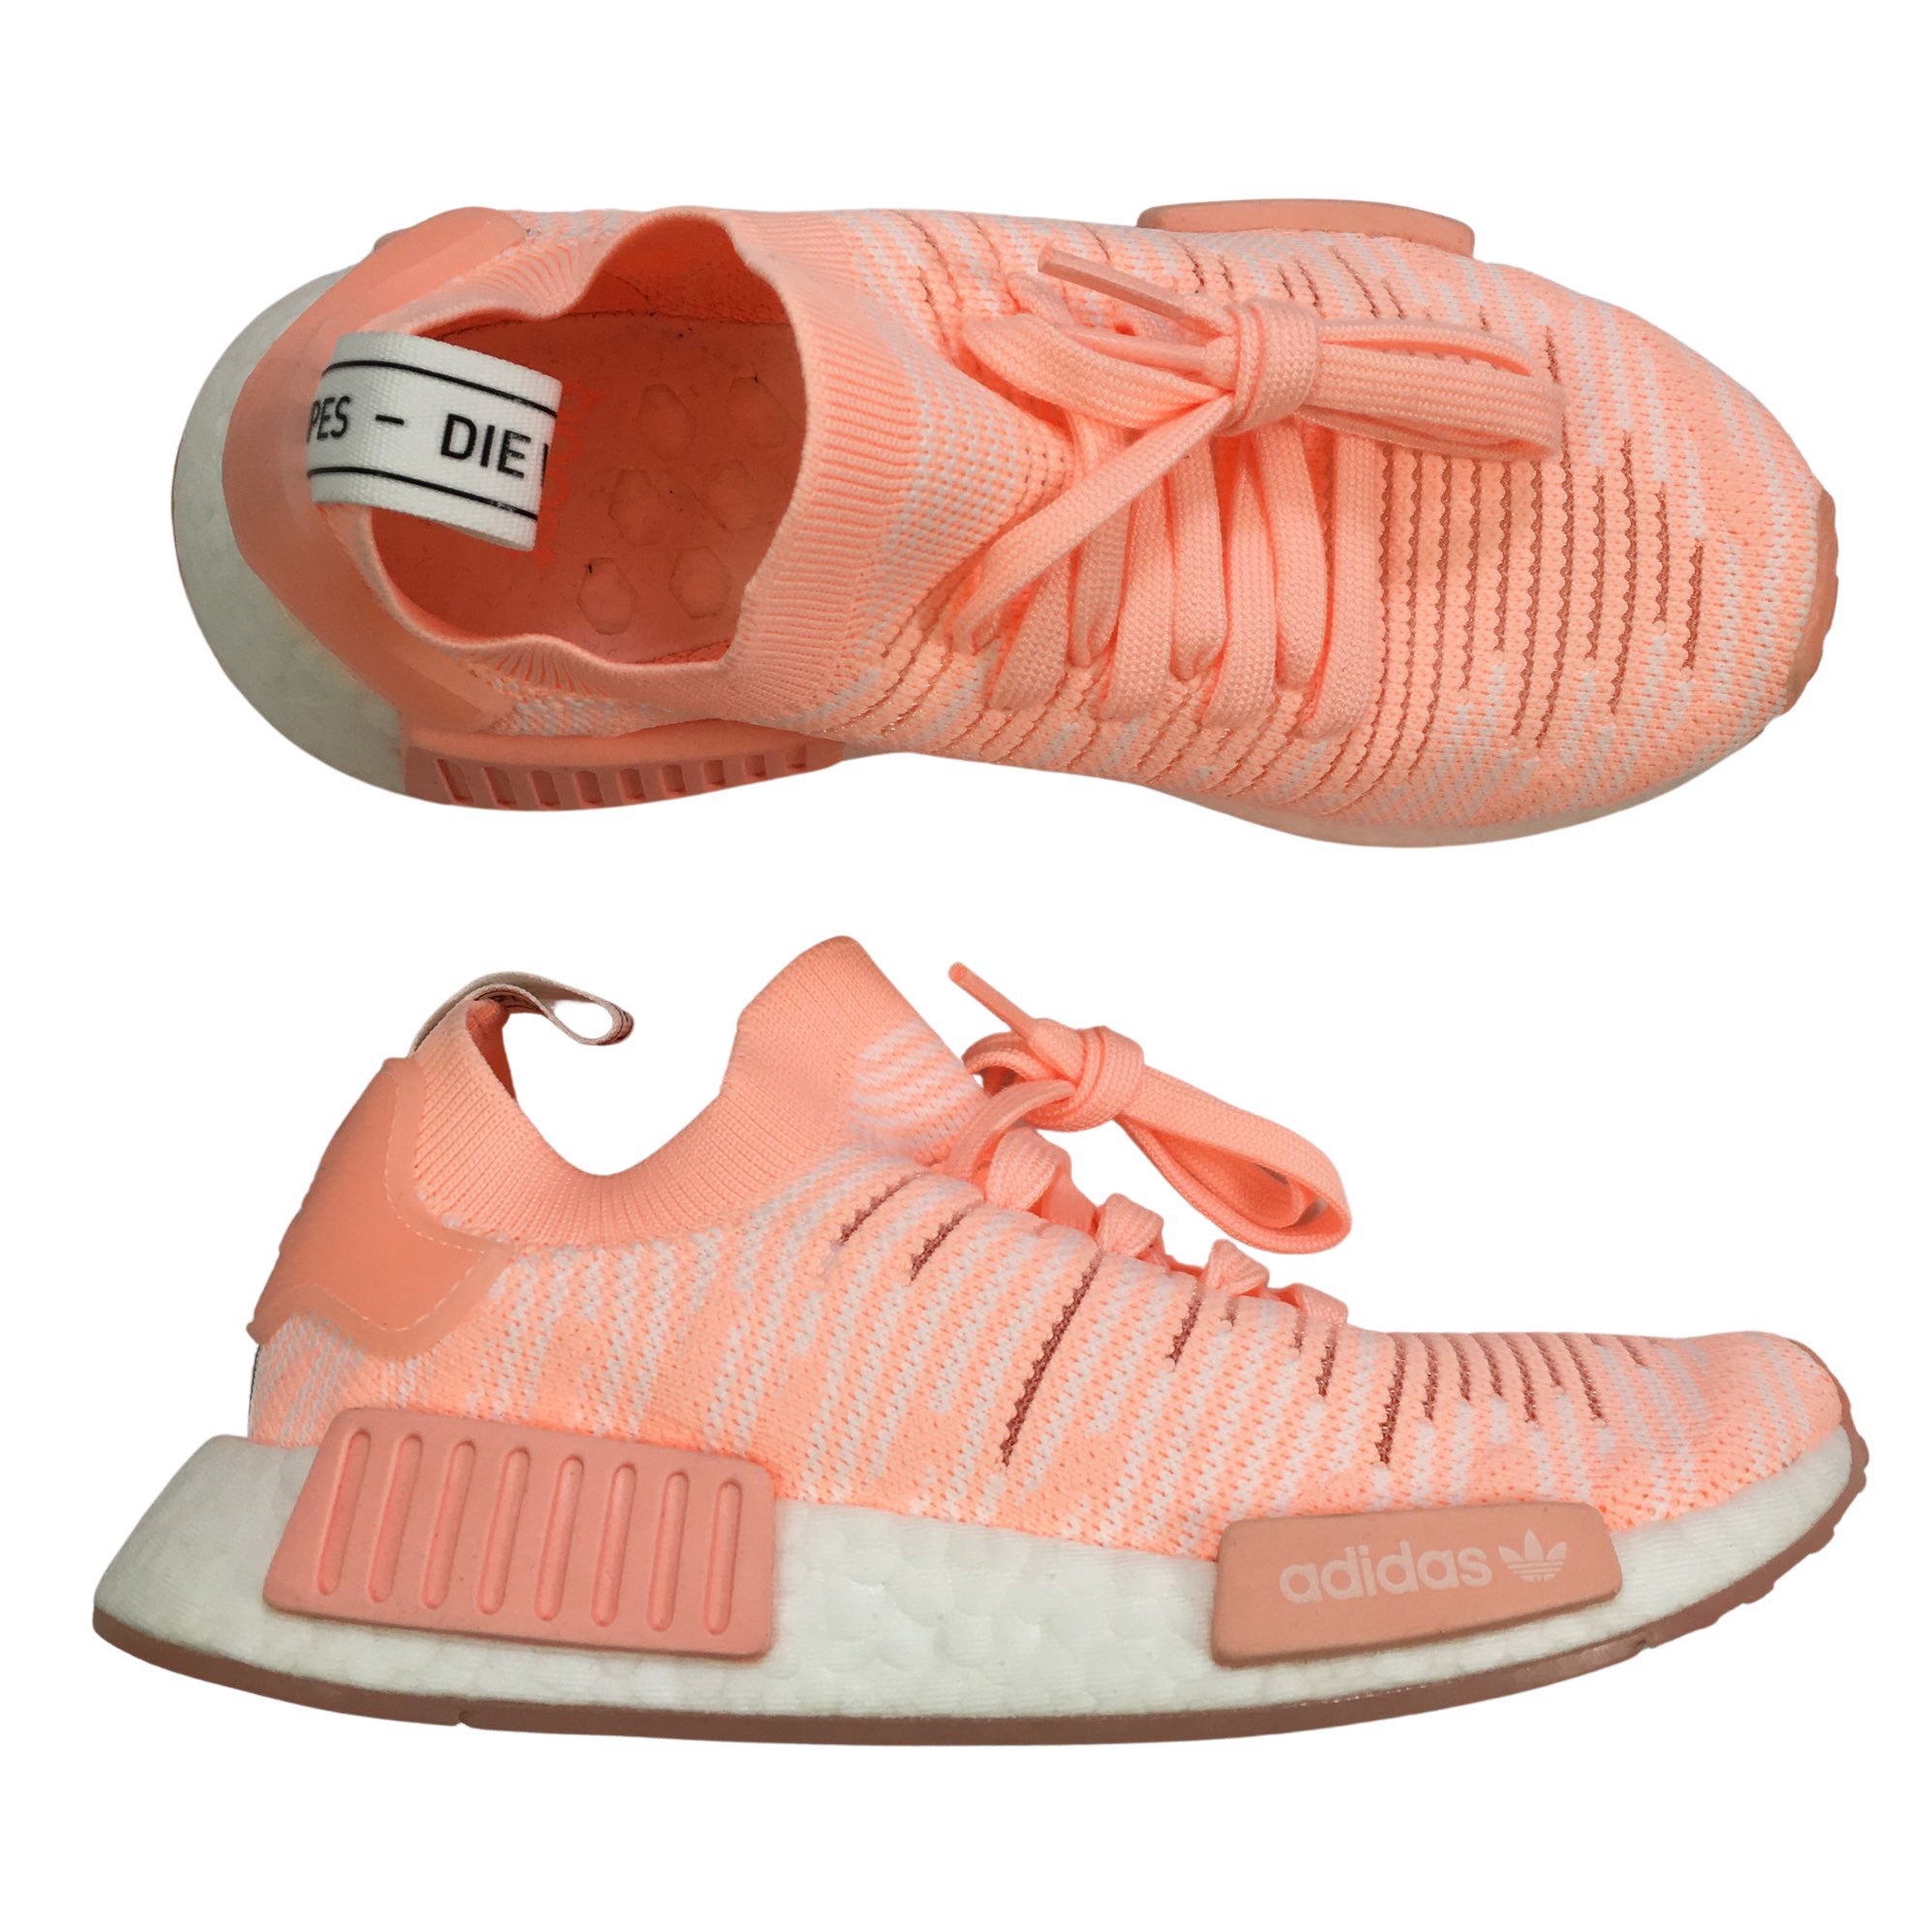 Women's Adidas Sneakers, 36 (Light red) | Emmy